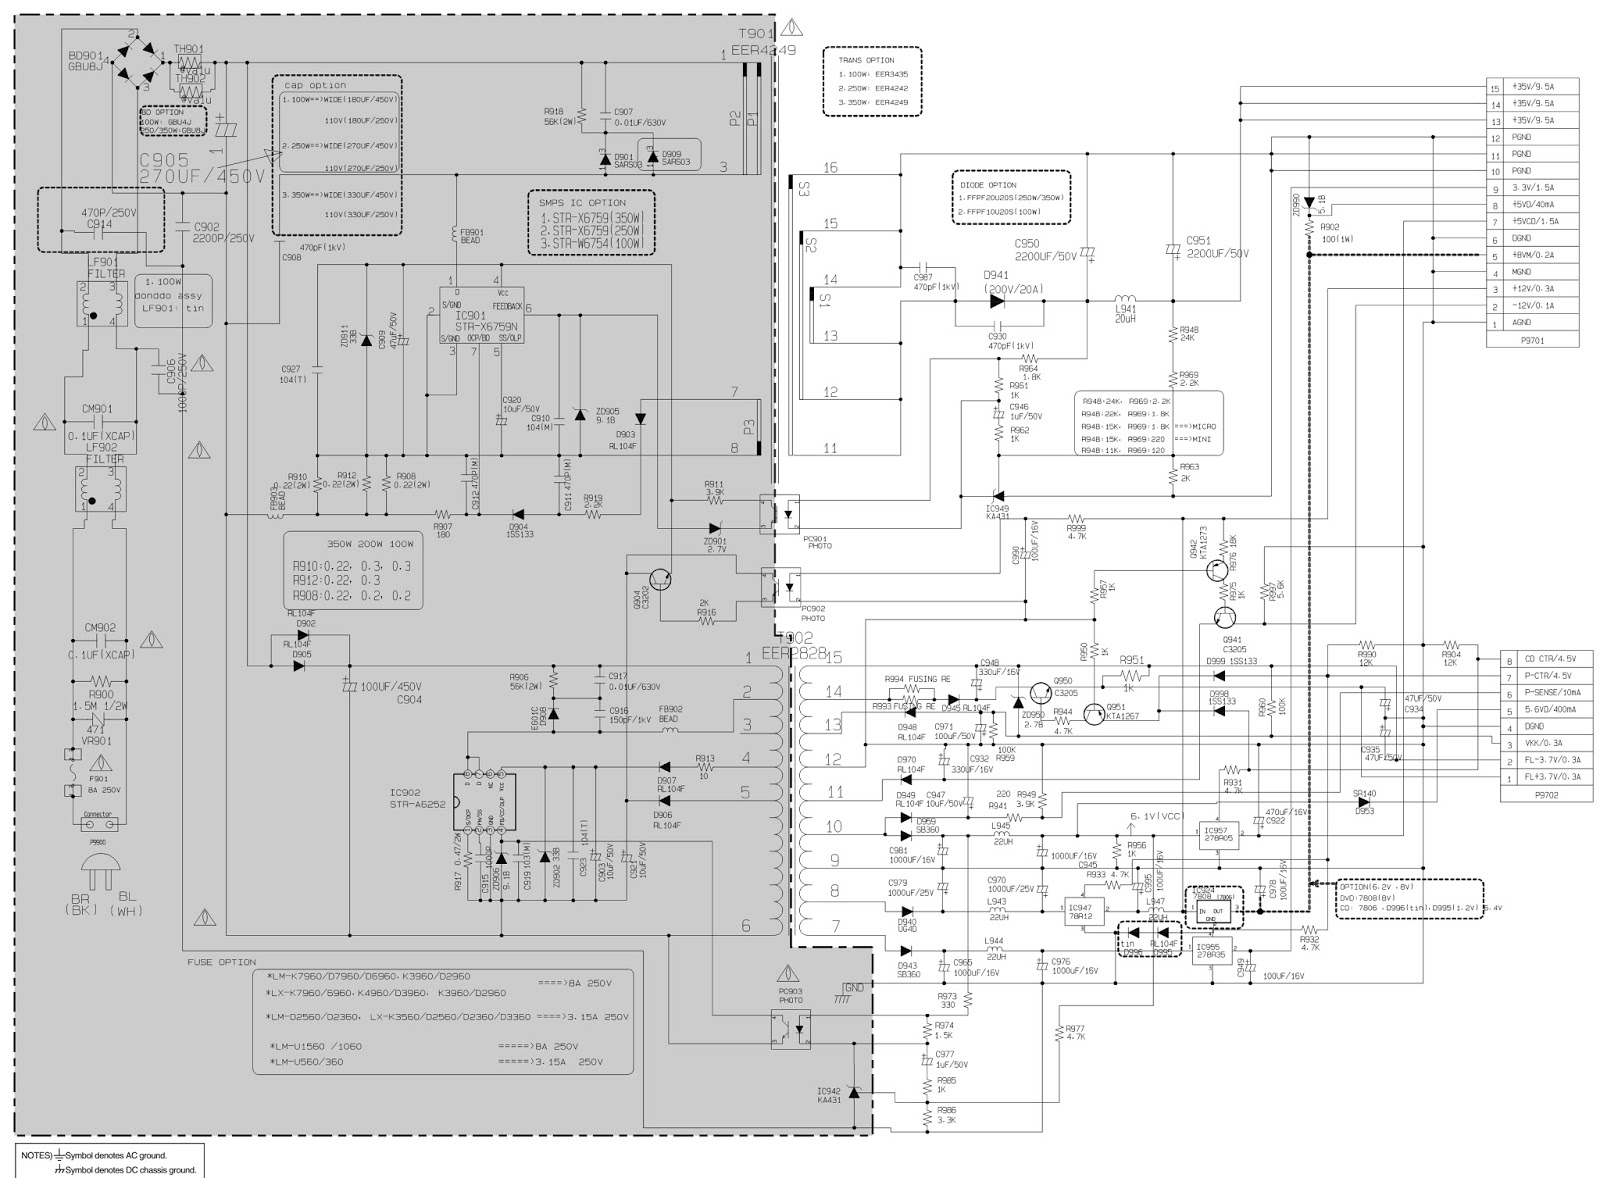 Electro help: LG LM U1060 – LMS U1060 – 3-CD CHANGER - SMPS POWER SUPPLY SCHEMATIC [Circuit